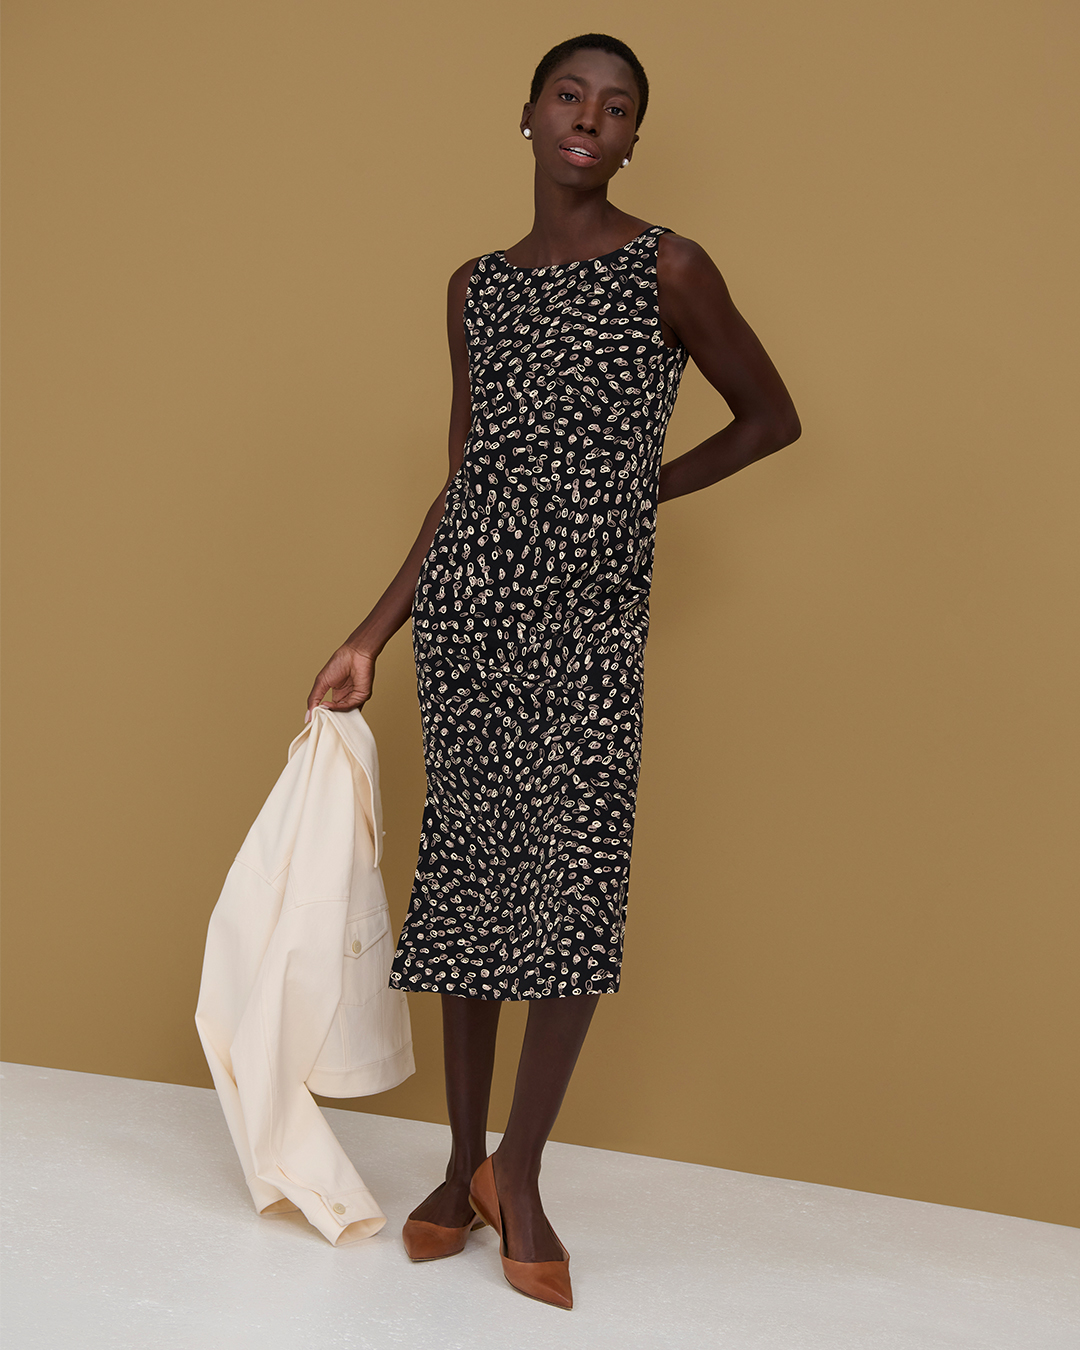 The Pre-Fall 2022 Lookbook Is Here! Get Inspired for the Season